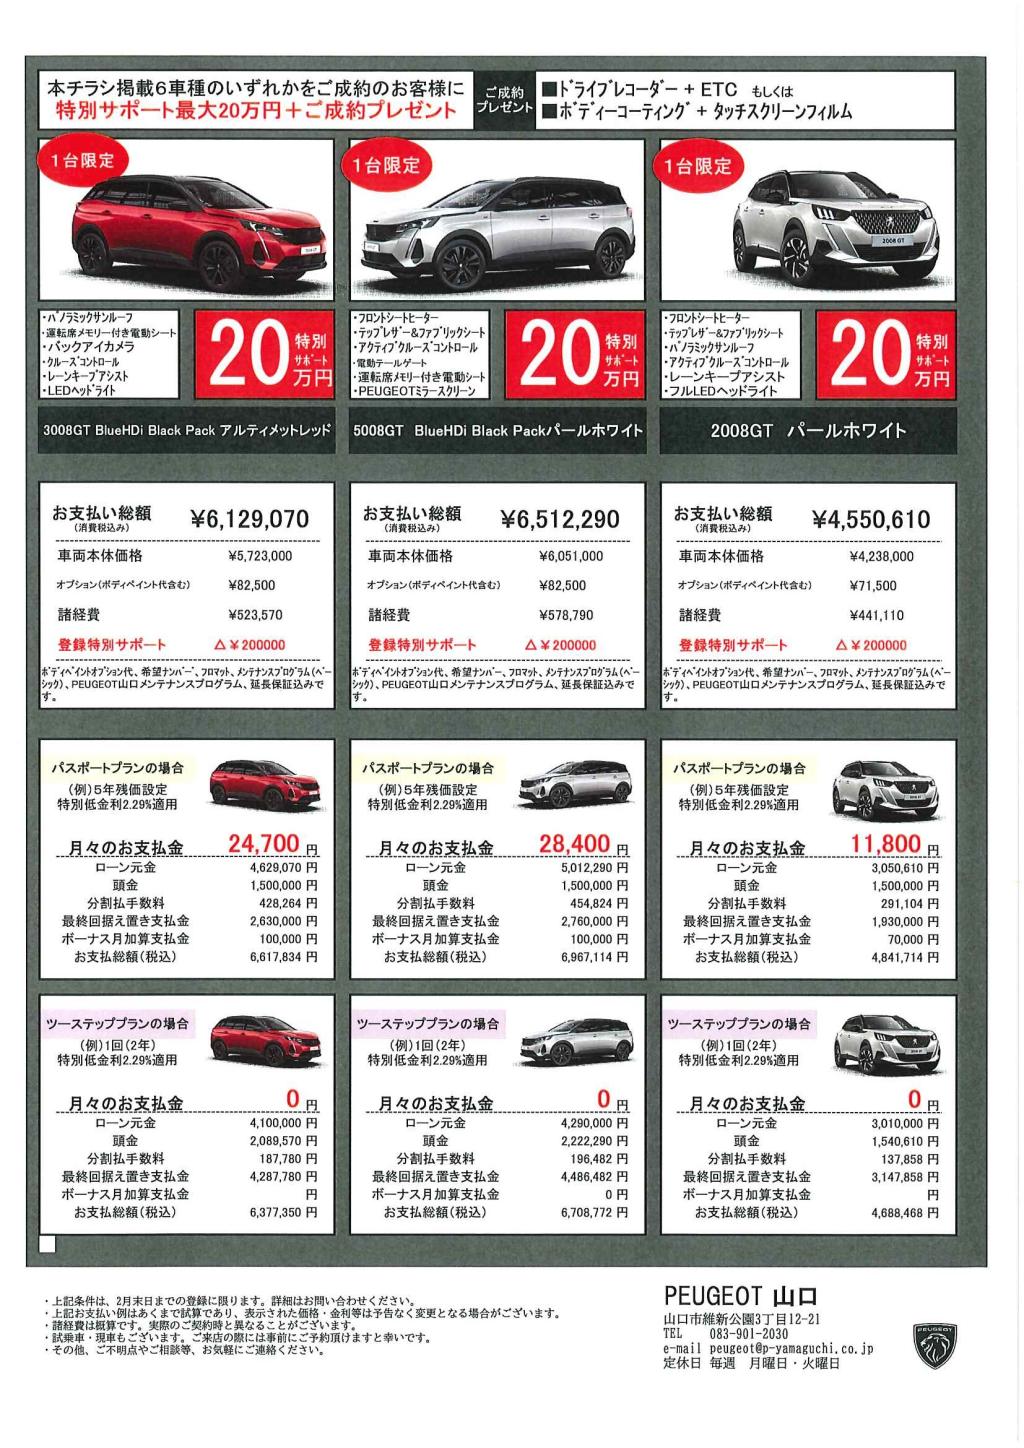 PEUGEOT山口限定！！ SPECIAL OFFER